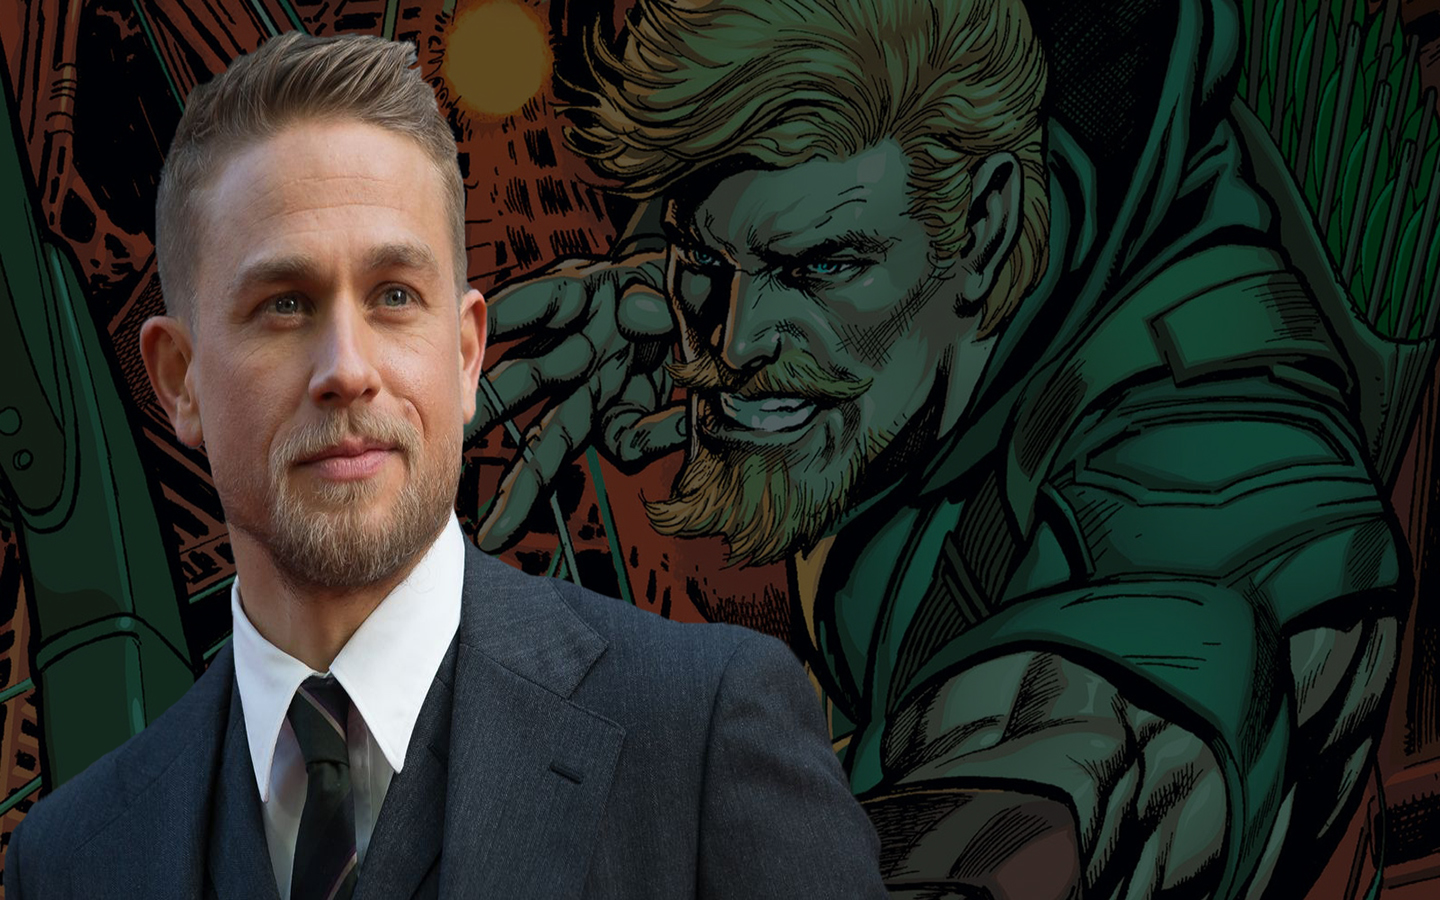 Charlie Hunnam Tells DC ‘Give me a call’ in Regards to Green Arrow